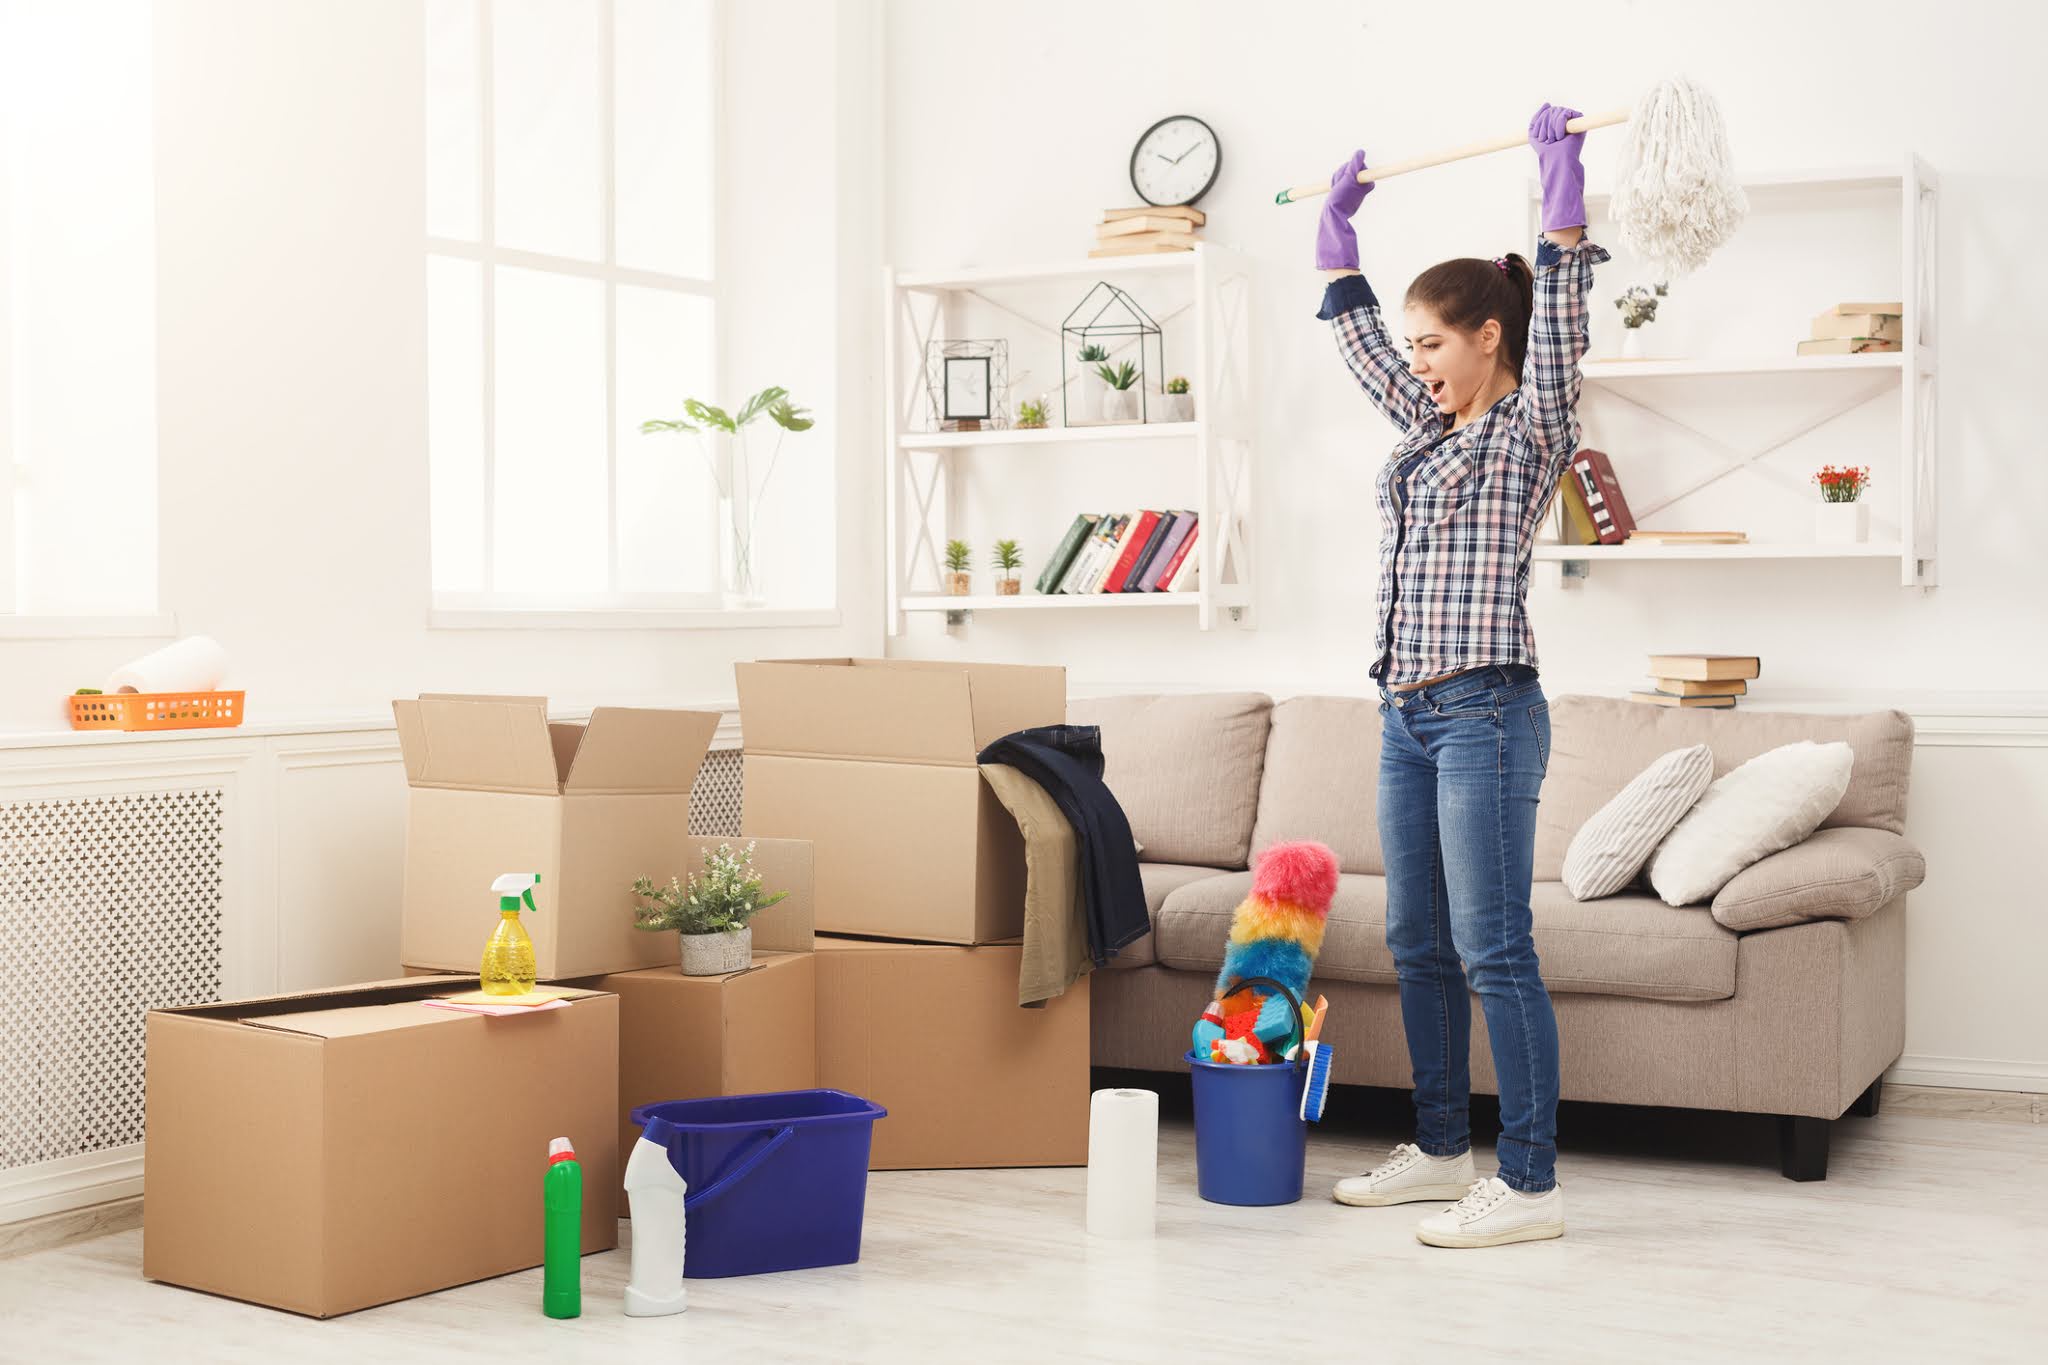 Long Distance Moving Company: Making Your Move Stress-Free